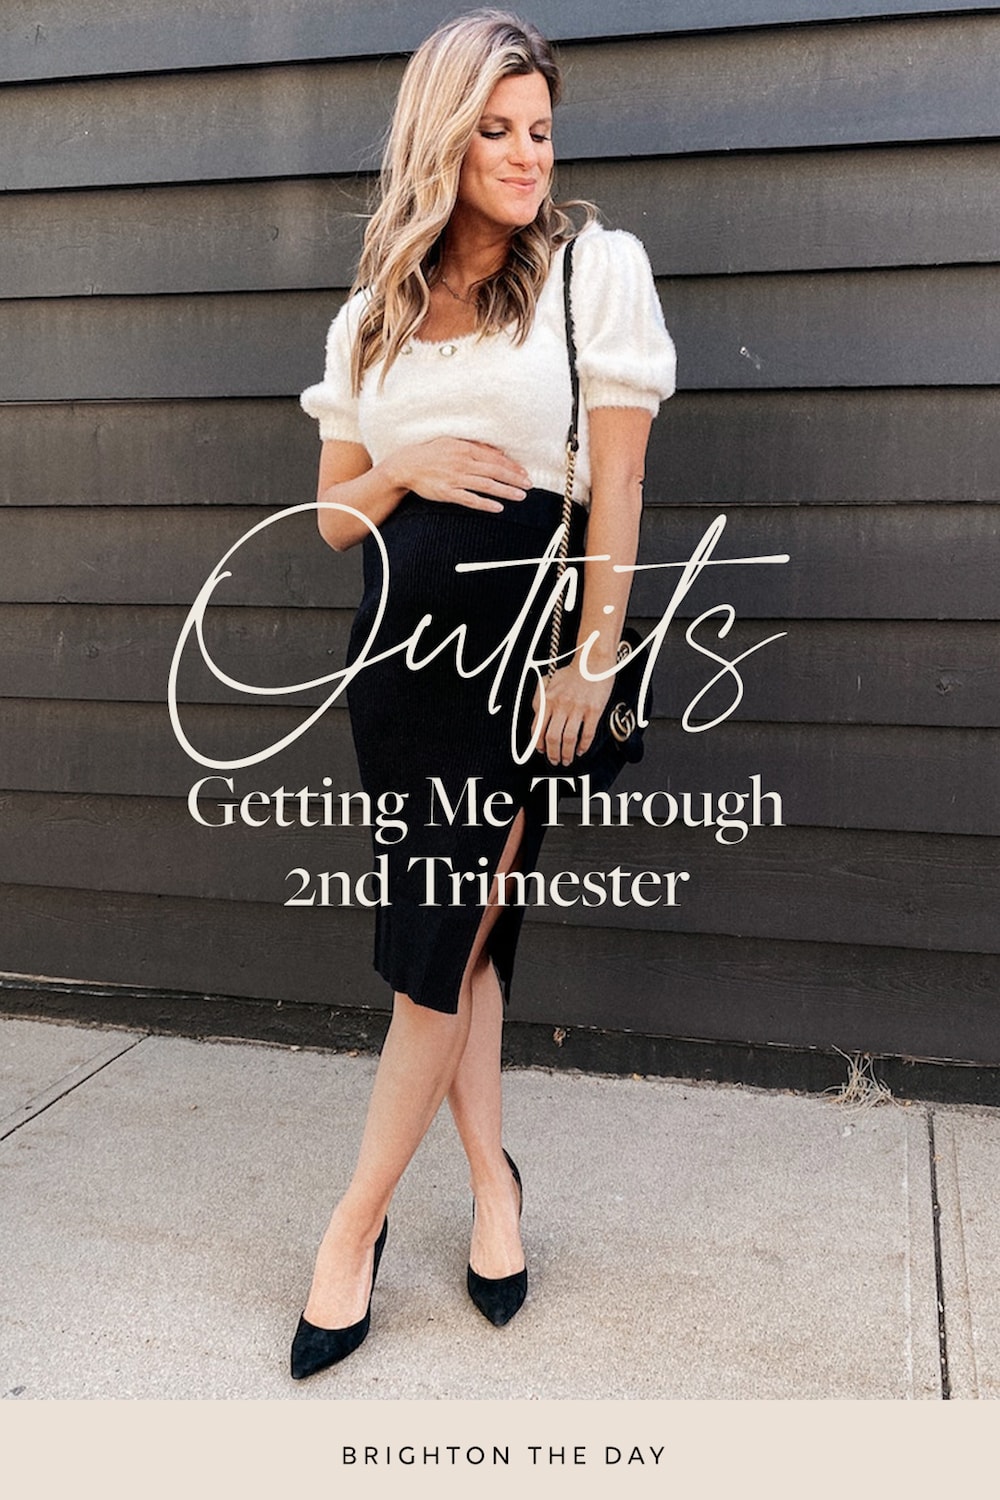 https://www.brightontheday.com/wp-content/uploads/2020/10/outfits-getting-me-through-2nd-trimester-blog-image.jpg